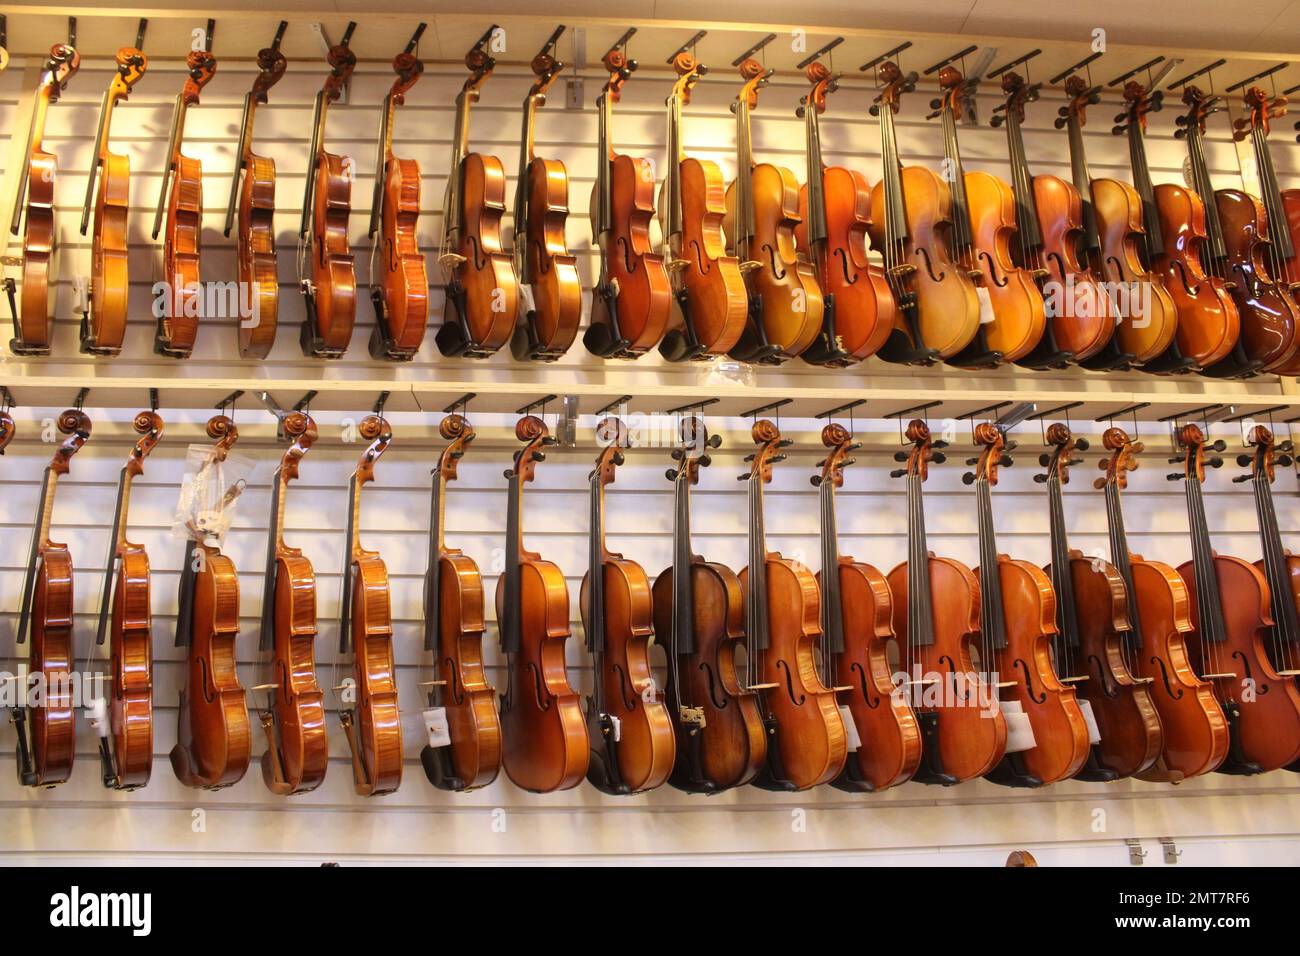 Violins on display in music store Stock Photo